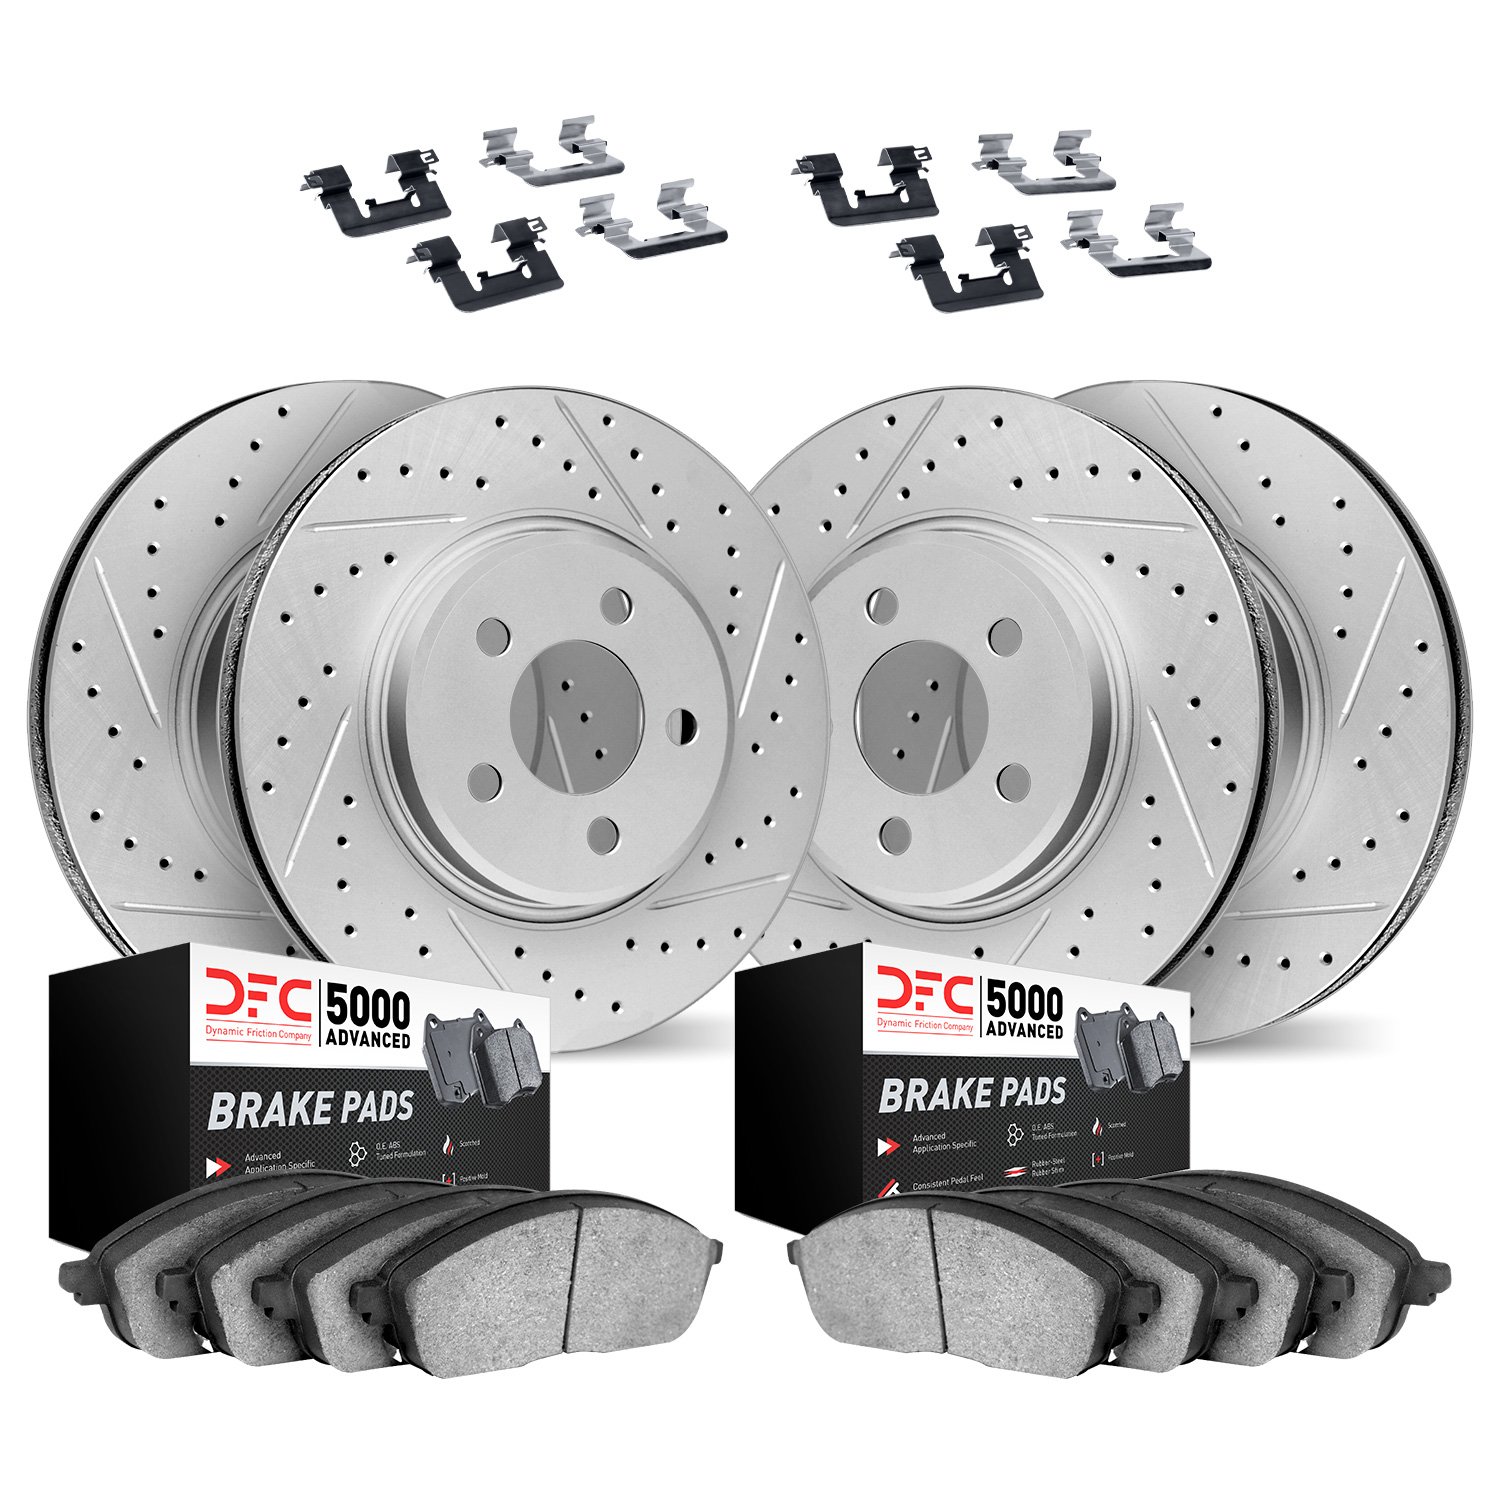 2514-46013 Geoperformance Drilled/Slotted Rotors w/5000 Advanced Brake Pads Kit & Hardware, 2003-2007 GM, Position: Front and Re